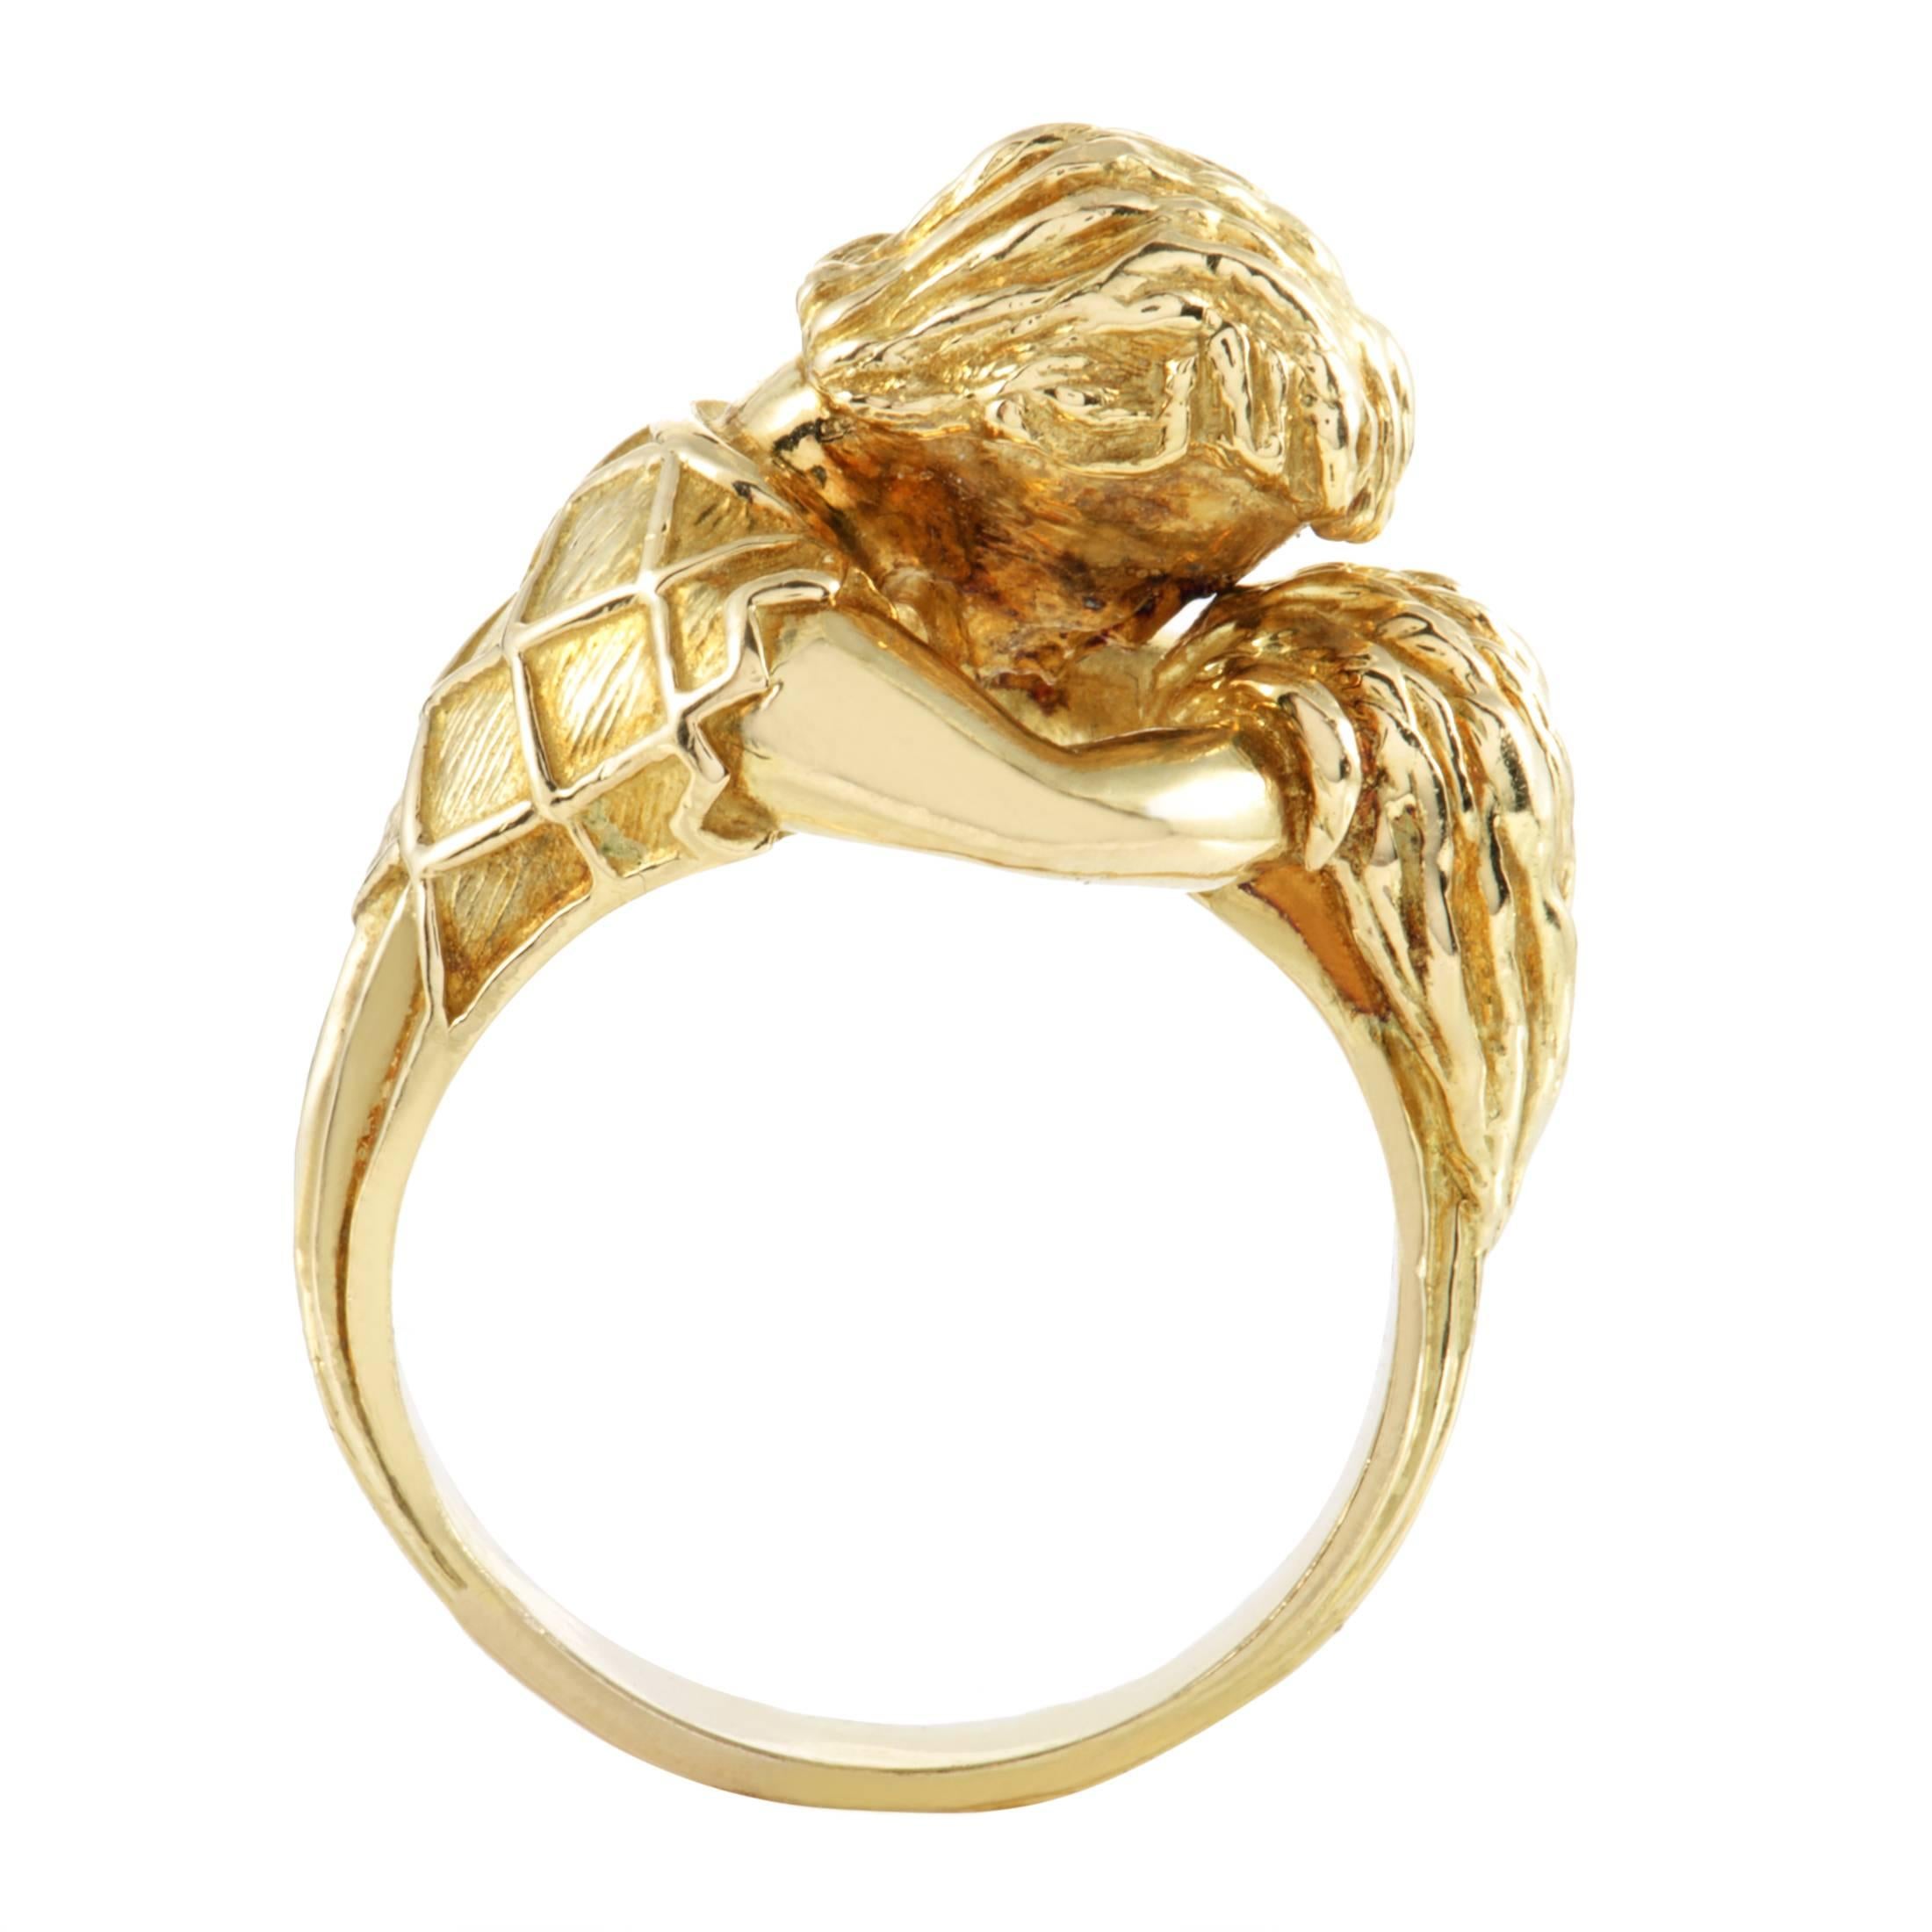 Amazing texture and enchanting radiance of 18K yellow gold set a majestic luxurious tone for this exceptional ring from David Webb which boasts a slightly offbeat and expertly crafted shape with diverse finishes.
Ring Size: 12.0 (66 1/2)
Ring Top